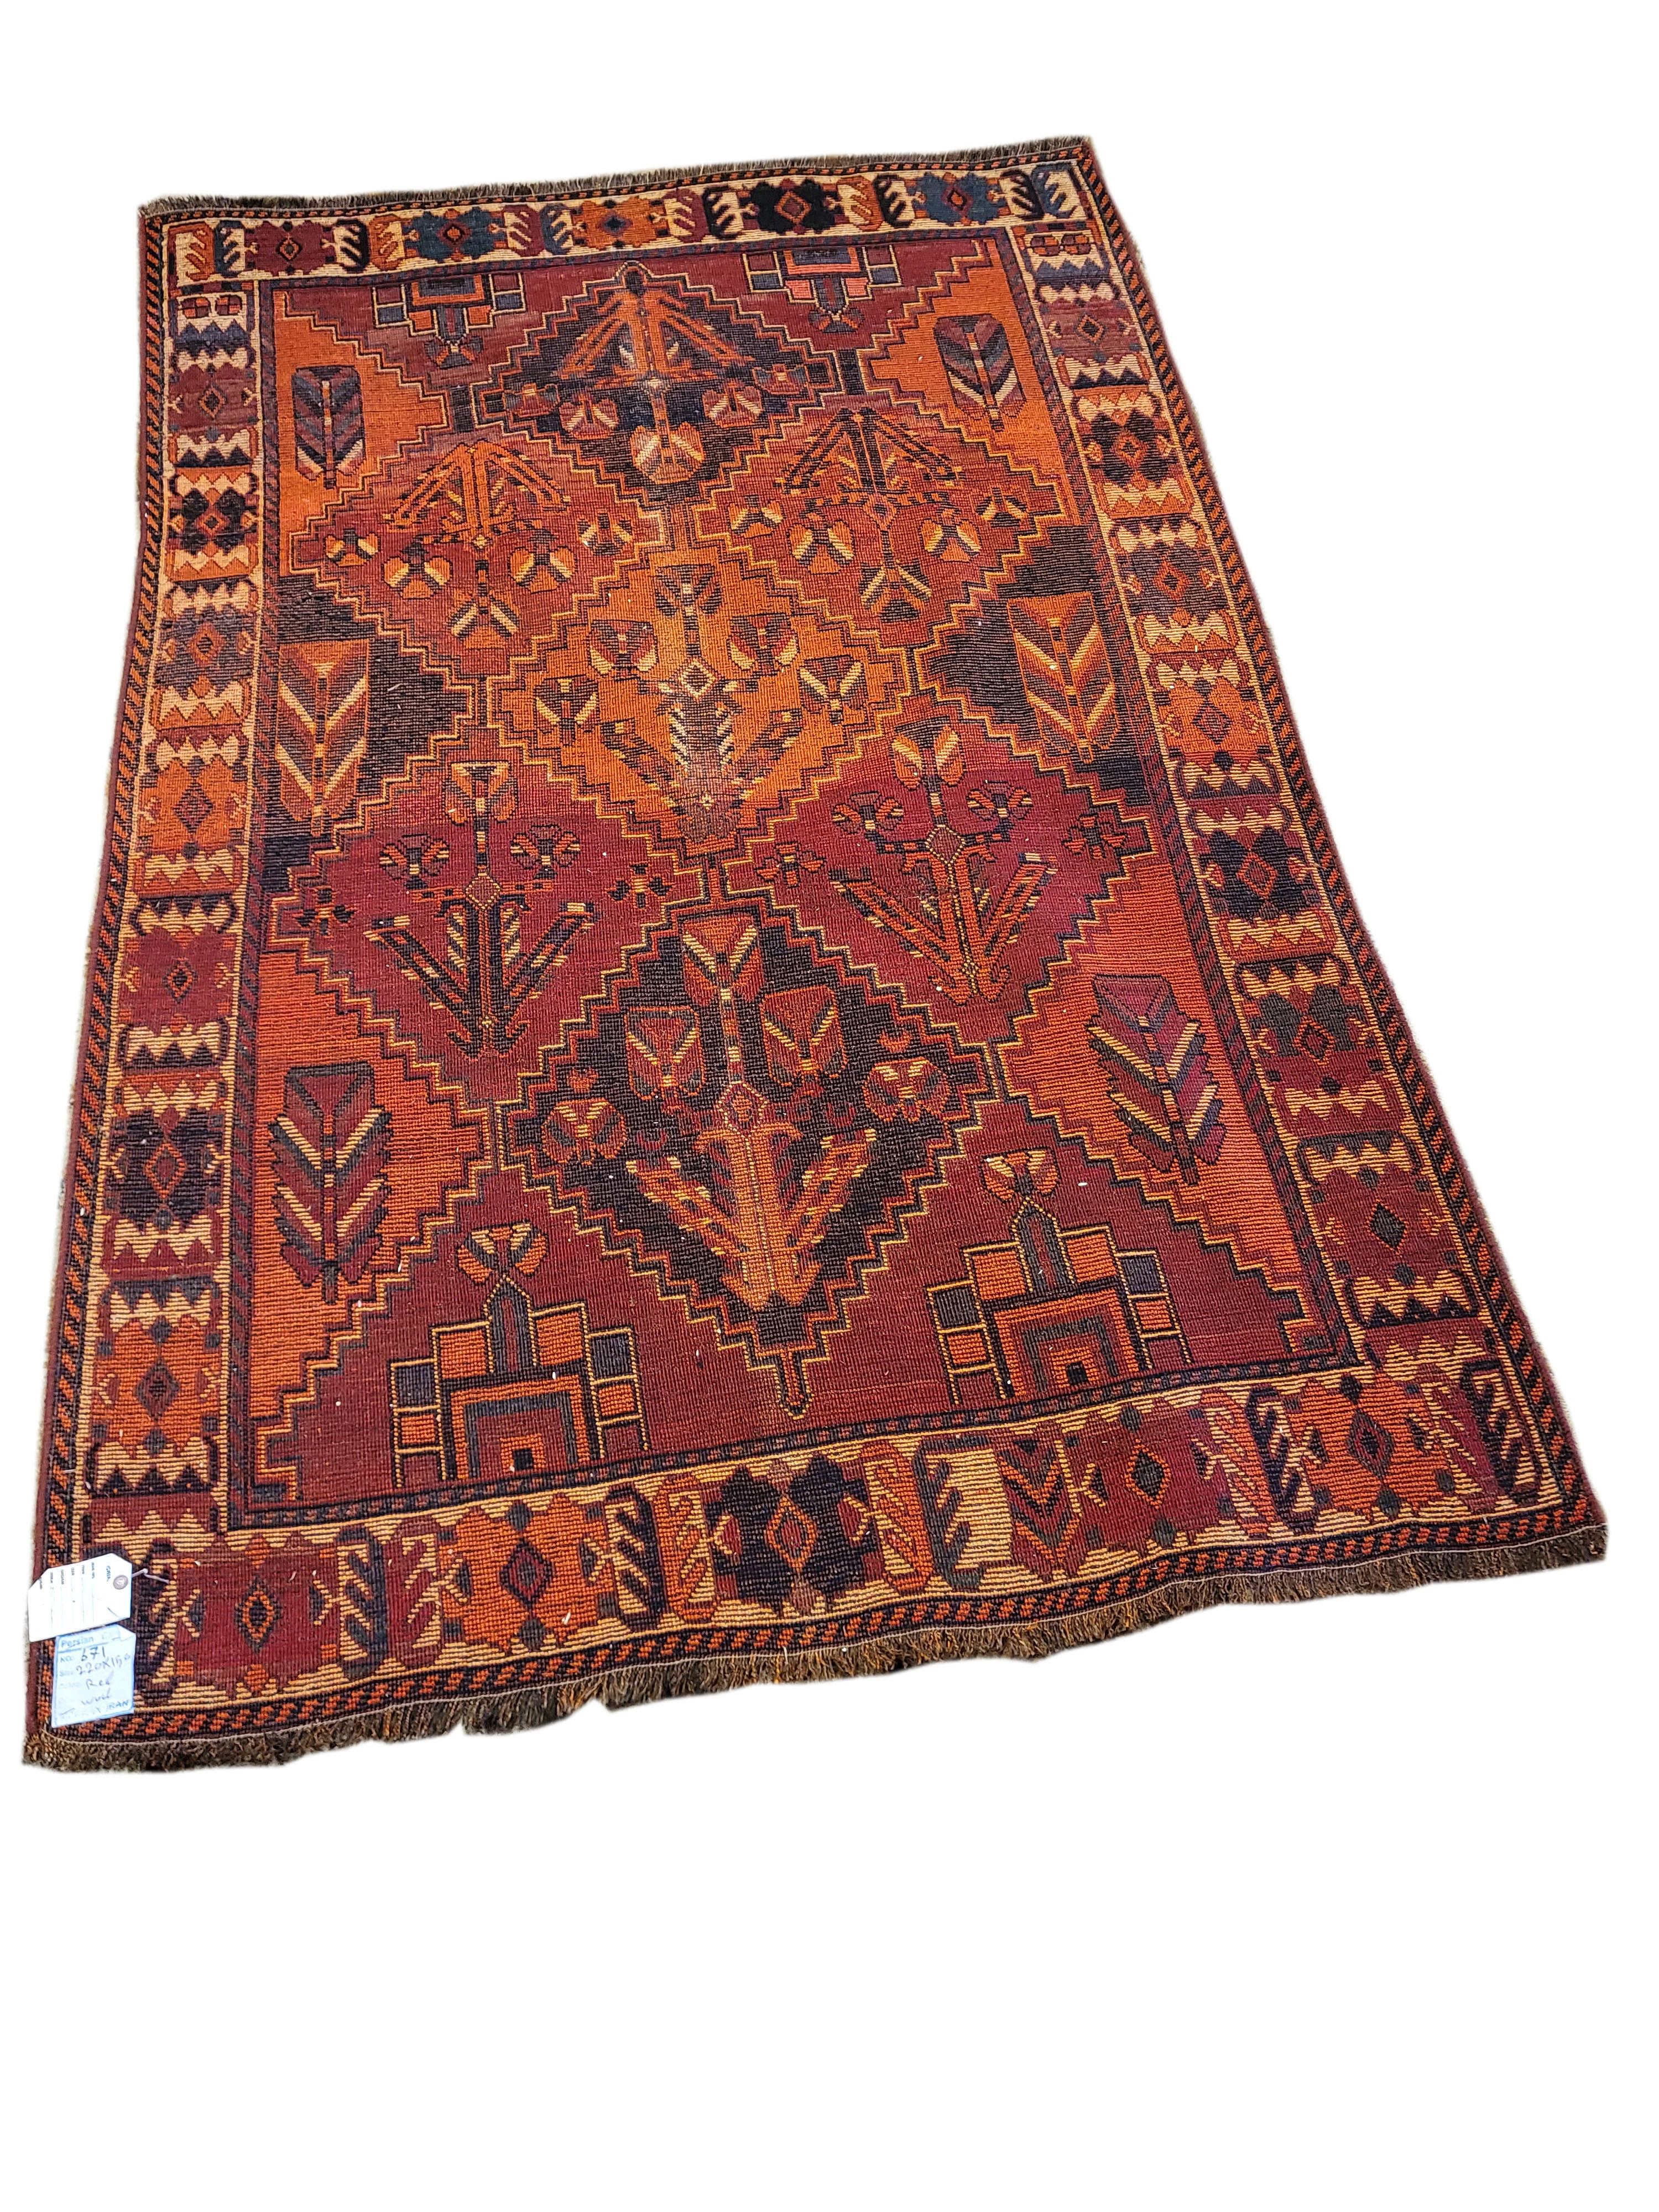 Hand-Knotted 5' x 7' Antique Persian Lori- rare all over design For Sale